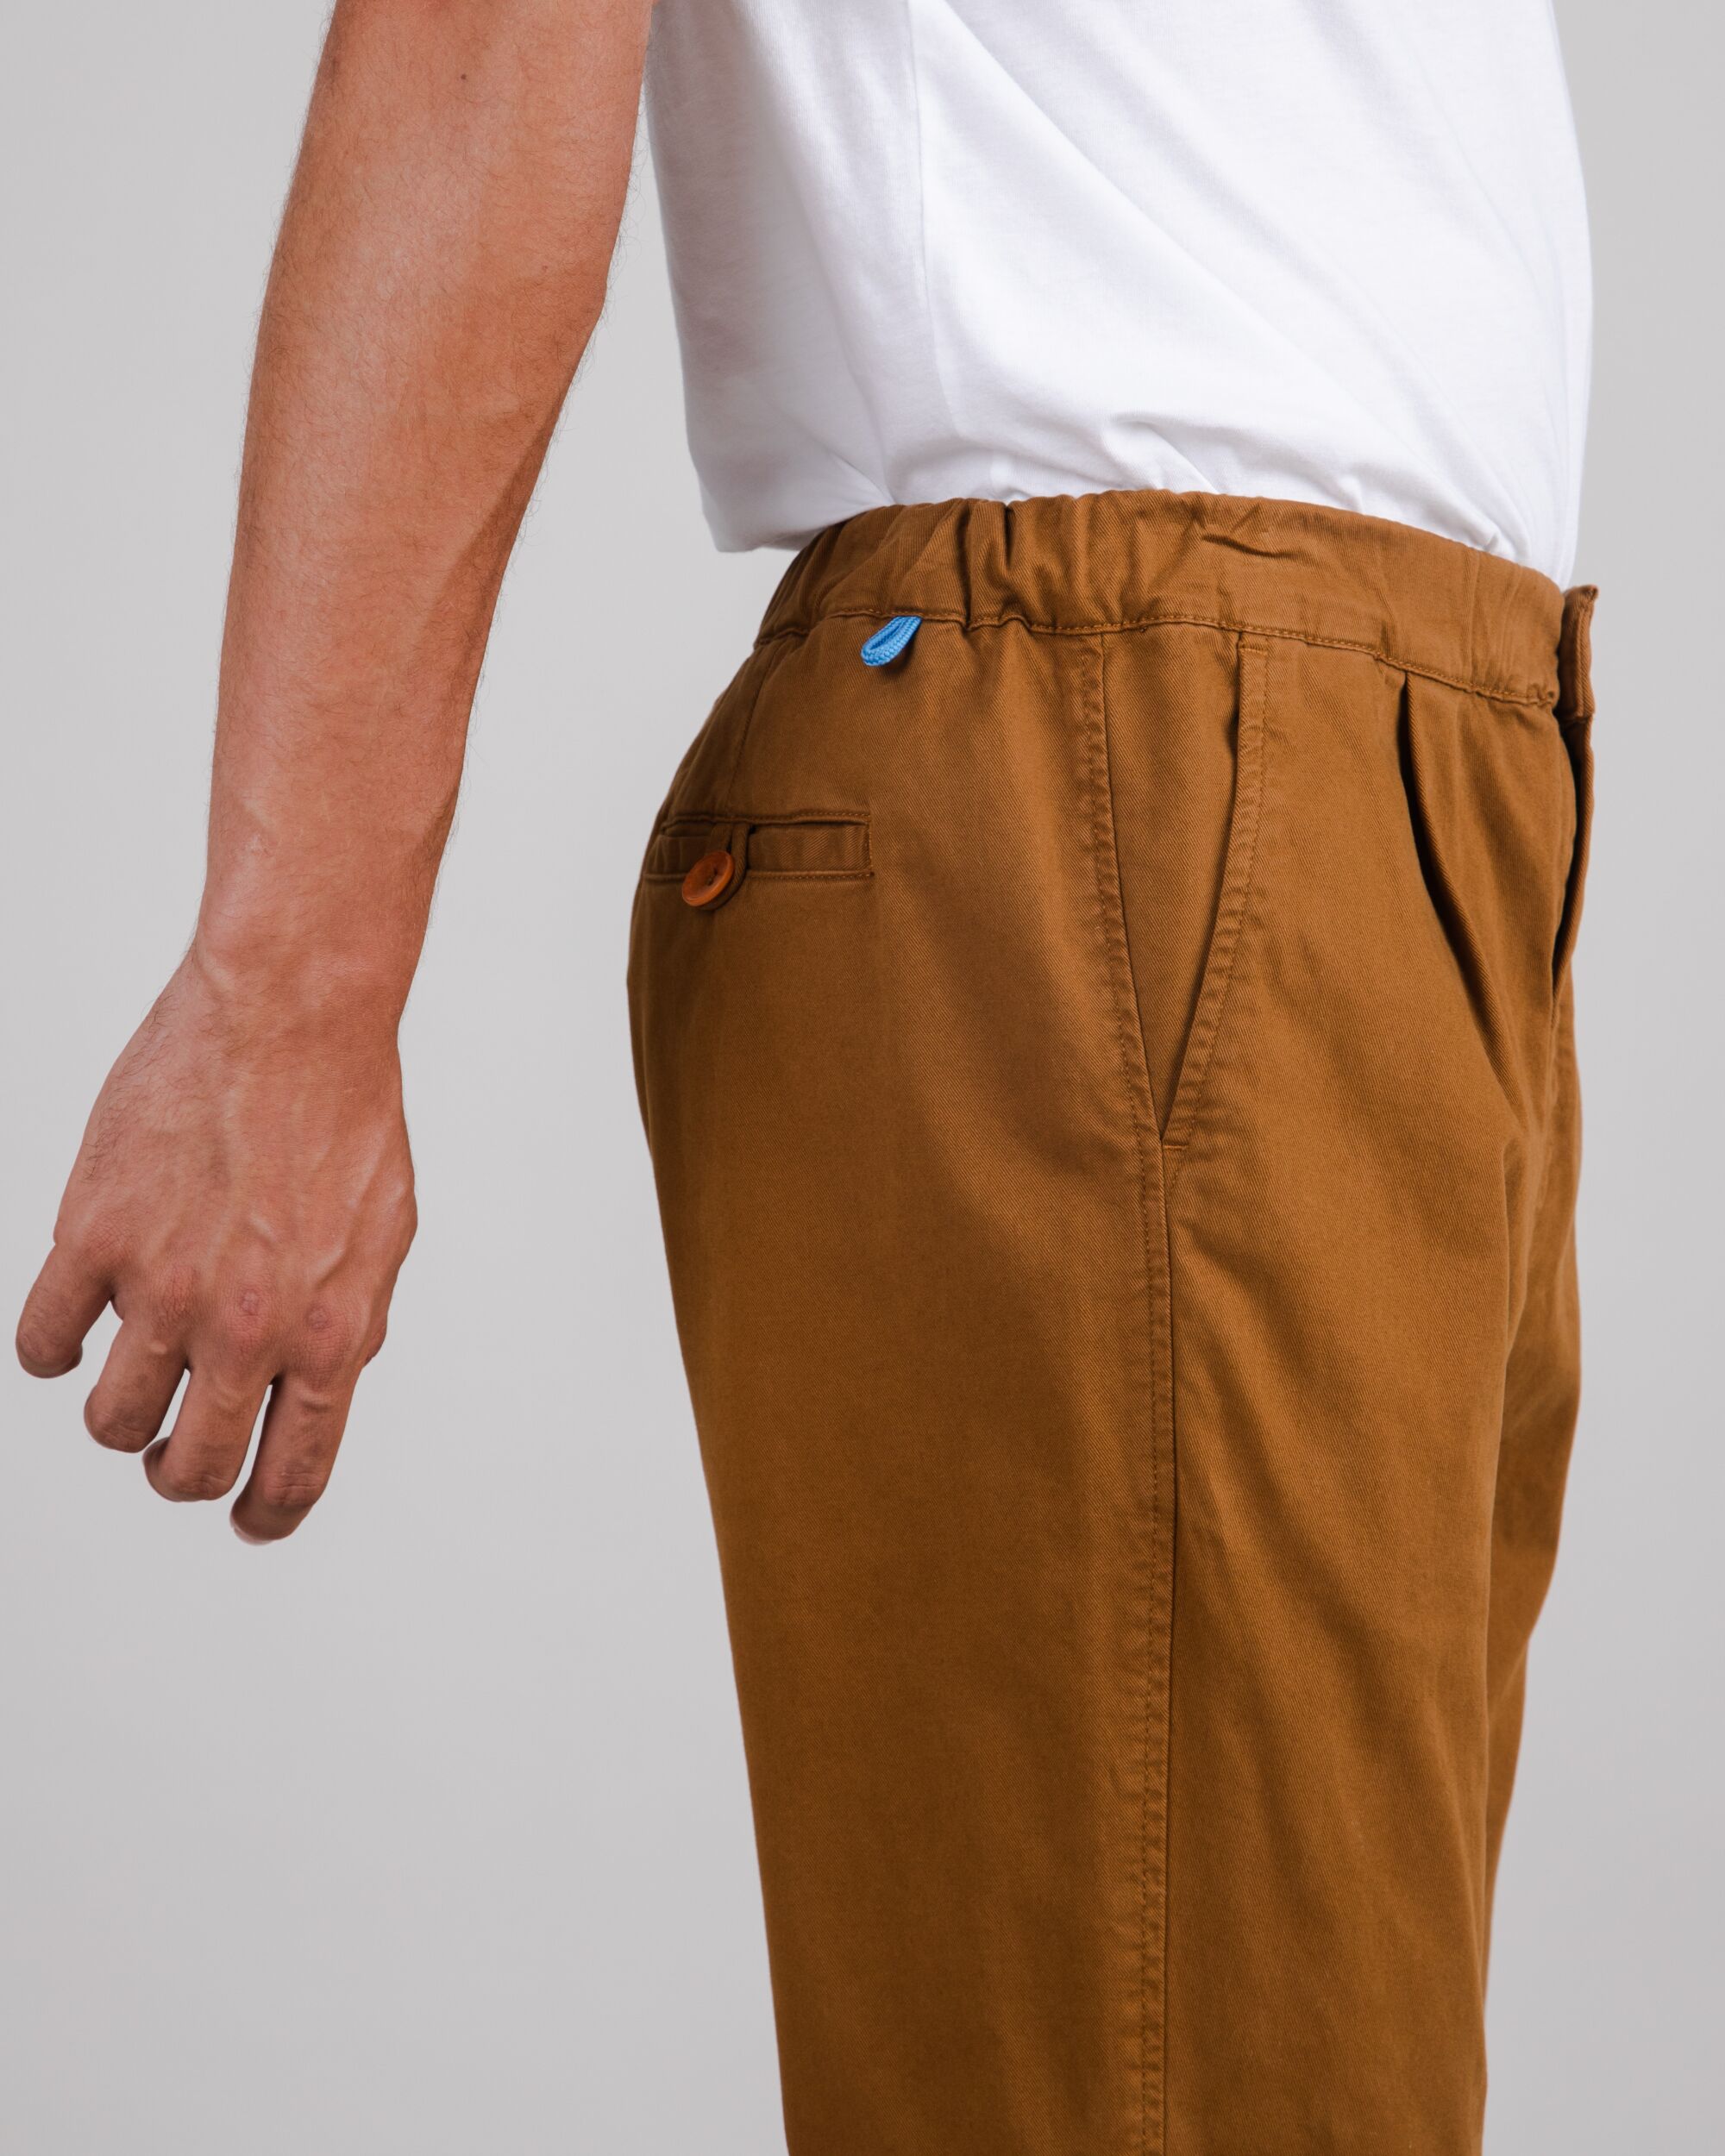 Comfort chino pants in brown made from organic cotton from Brava Fabrics